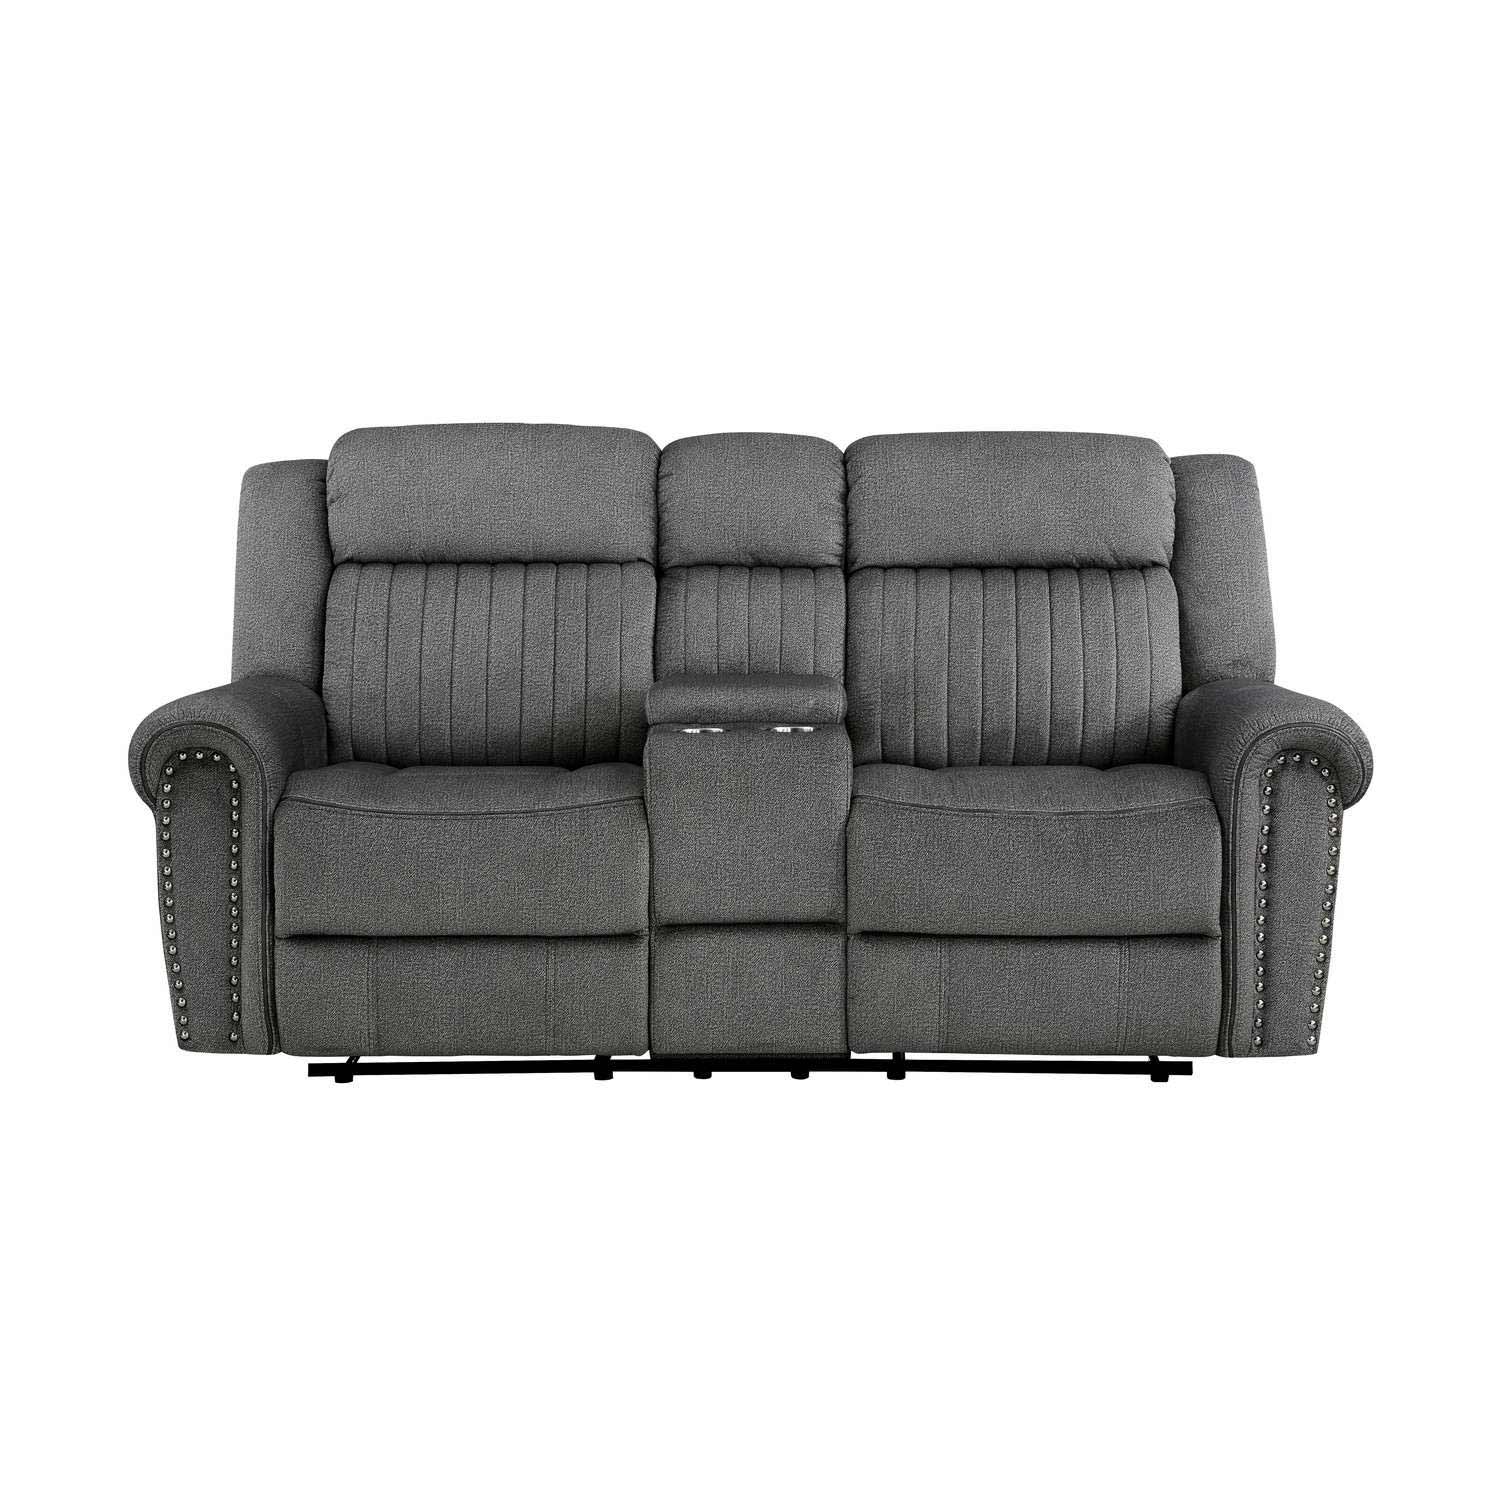 Homelegance Brennen Double Reclining Love Seat - Charcoal